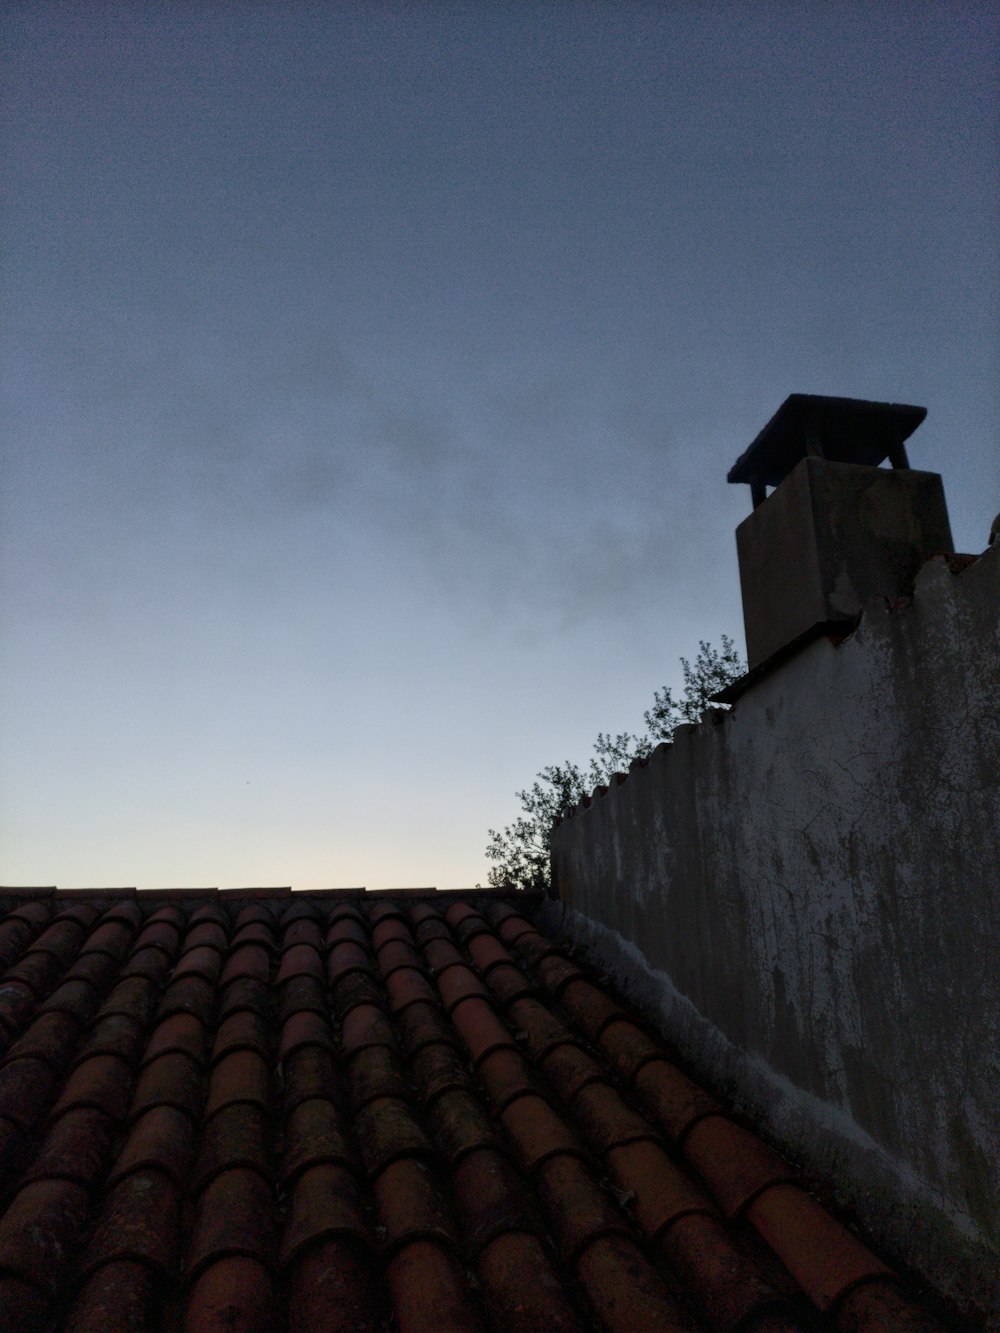 a view of the roof of a building at dusk